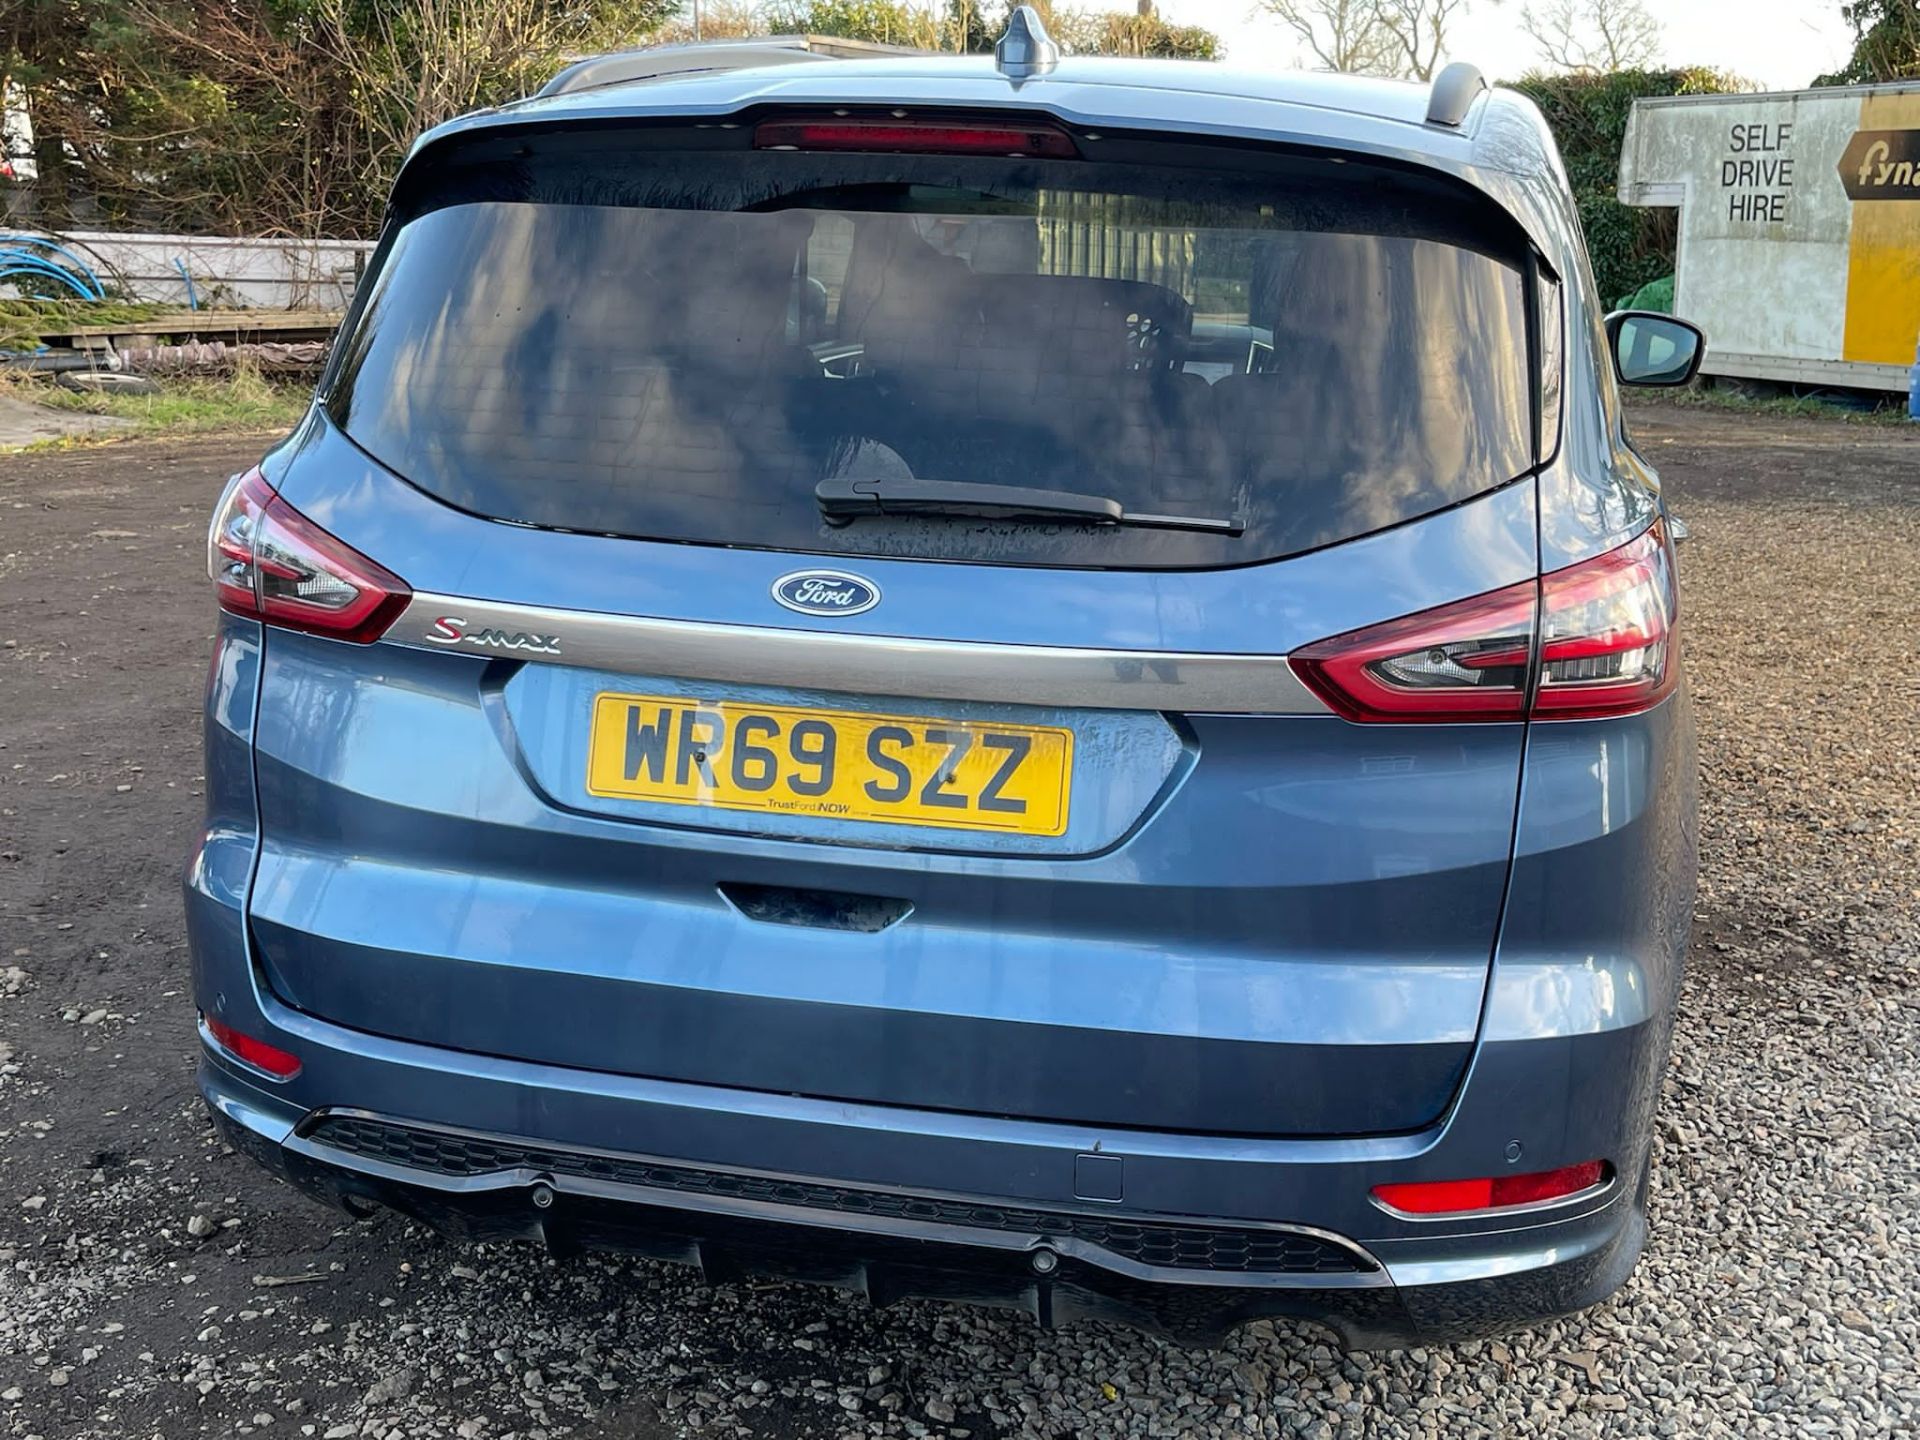 Ford s max 2019 7 seater - Image 6 of 6